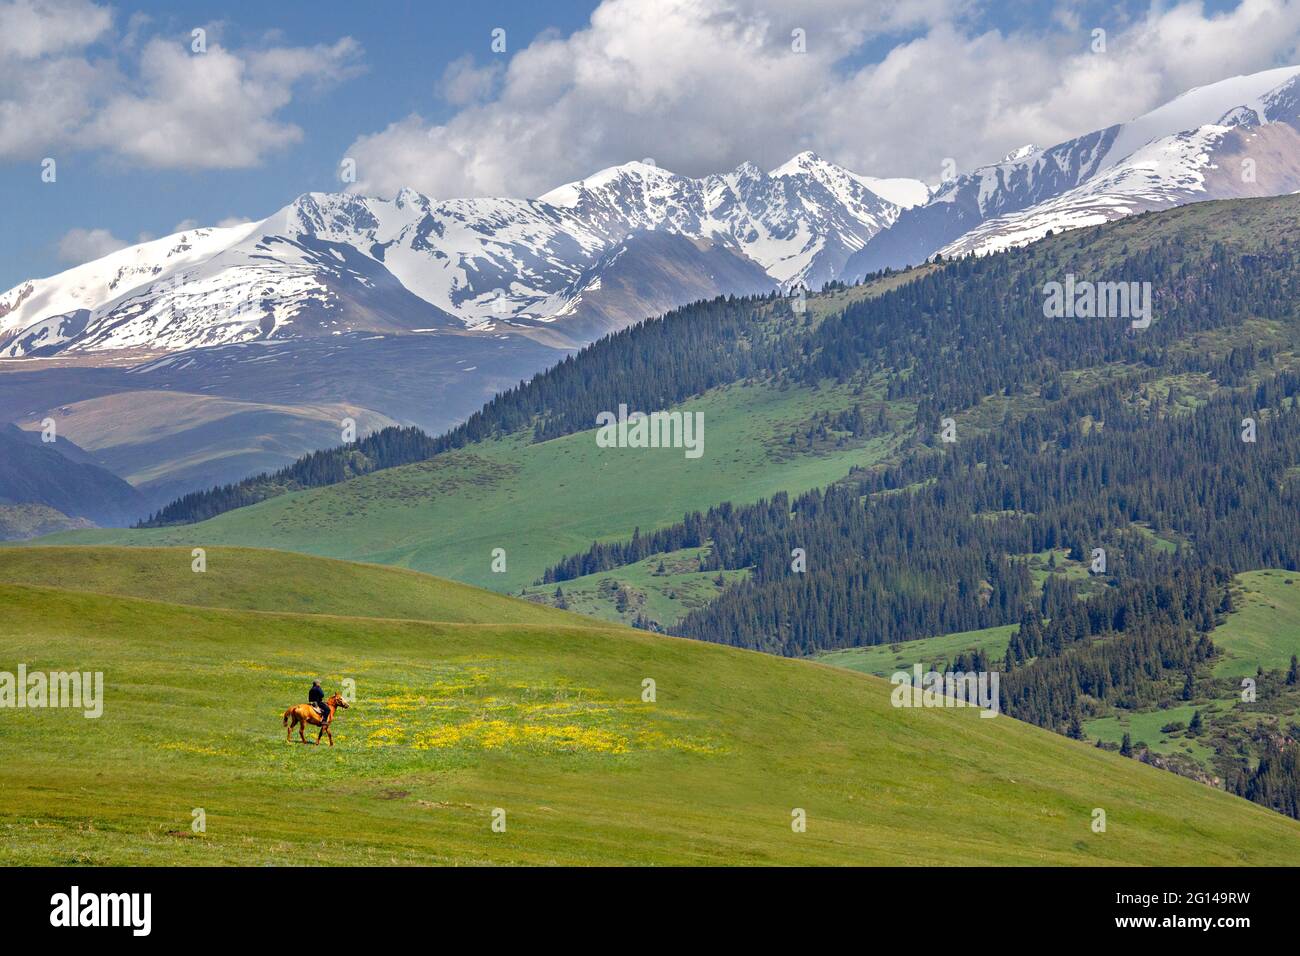 View over the Assy Plateau where the nomads go to spend the summer, near Almaty, Kazakhstan Stock Photo